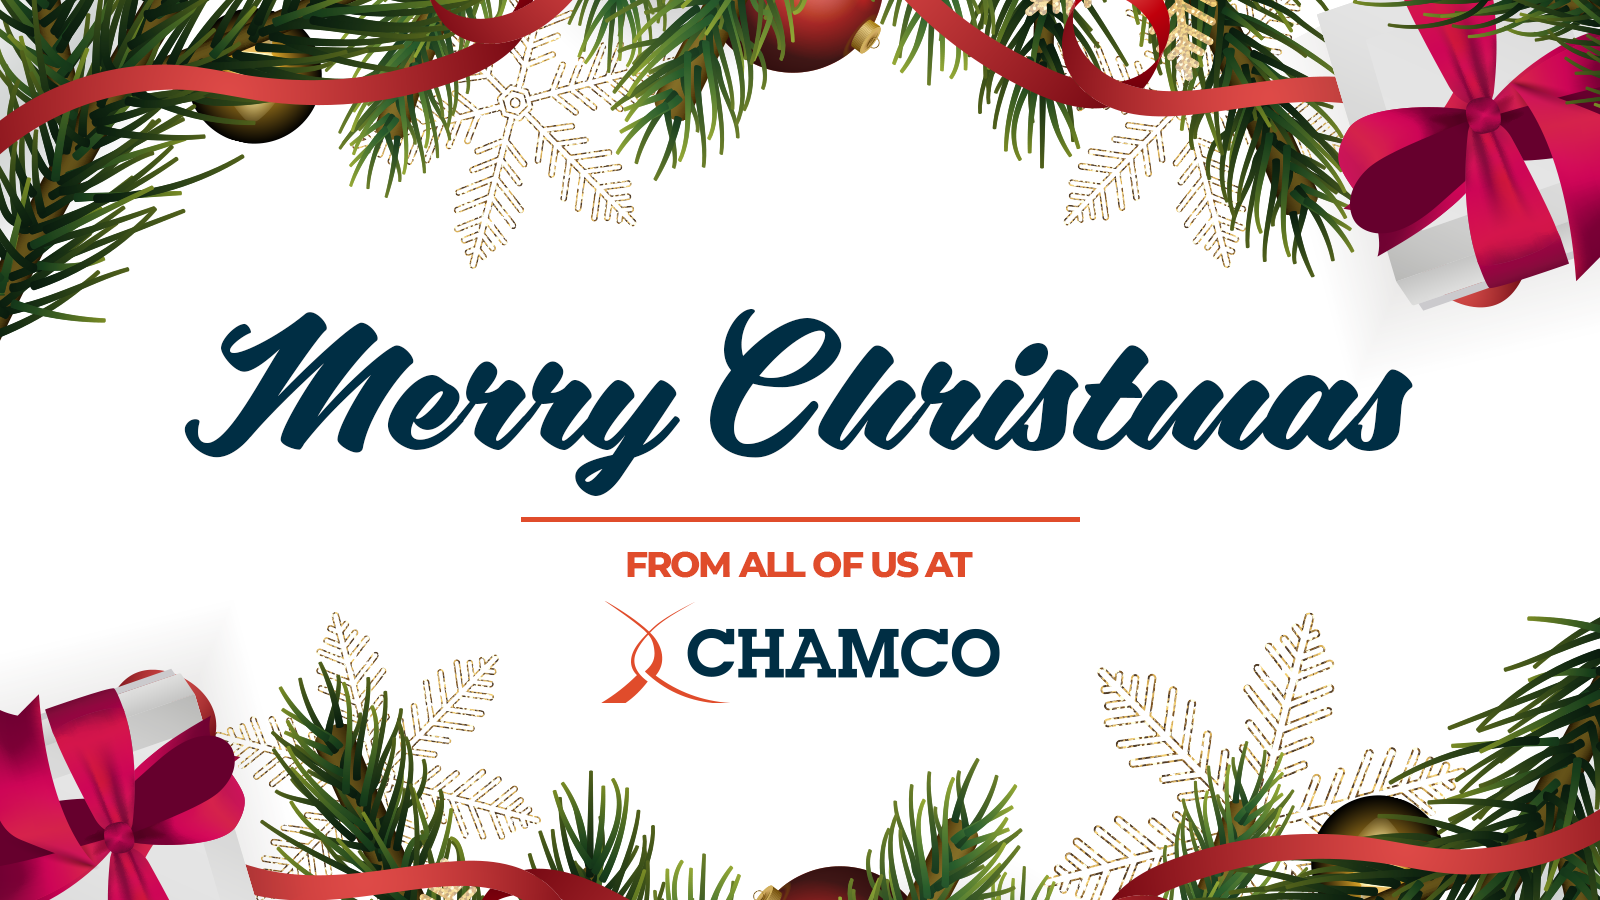 Merry Christmas from all of us at Chamco